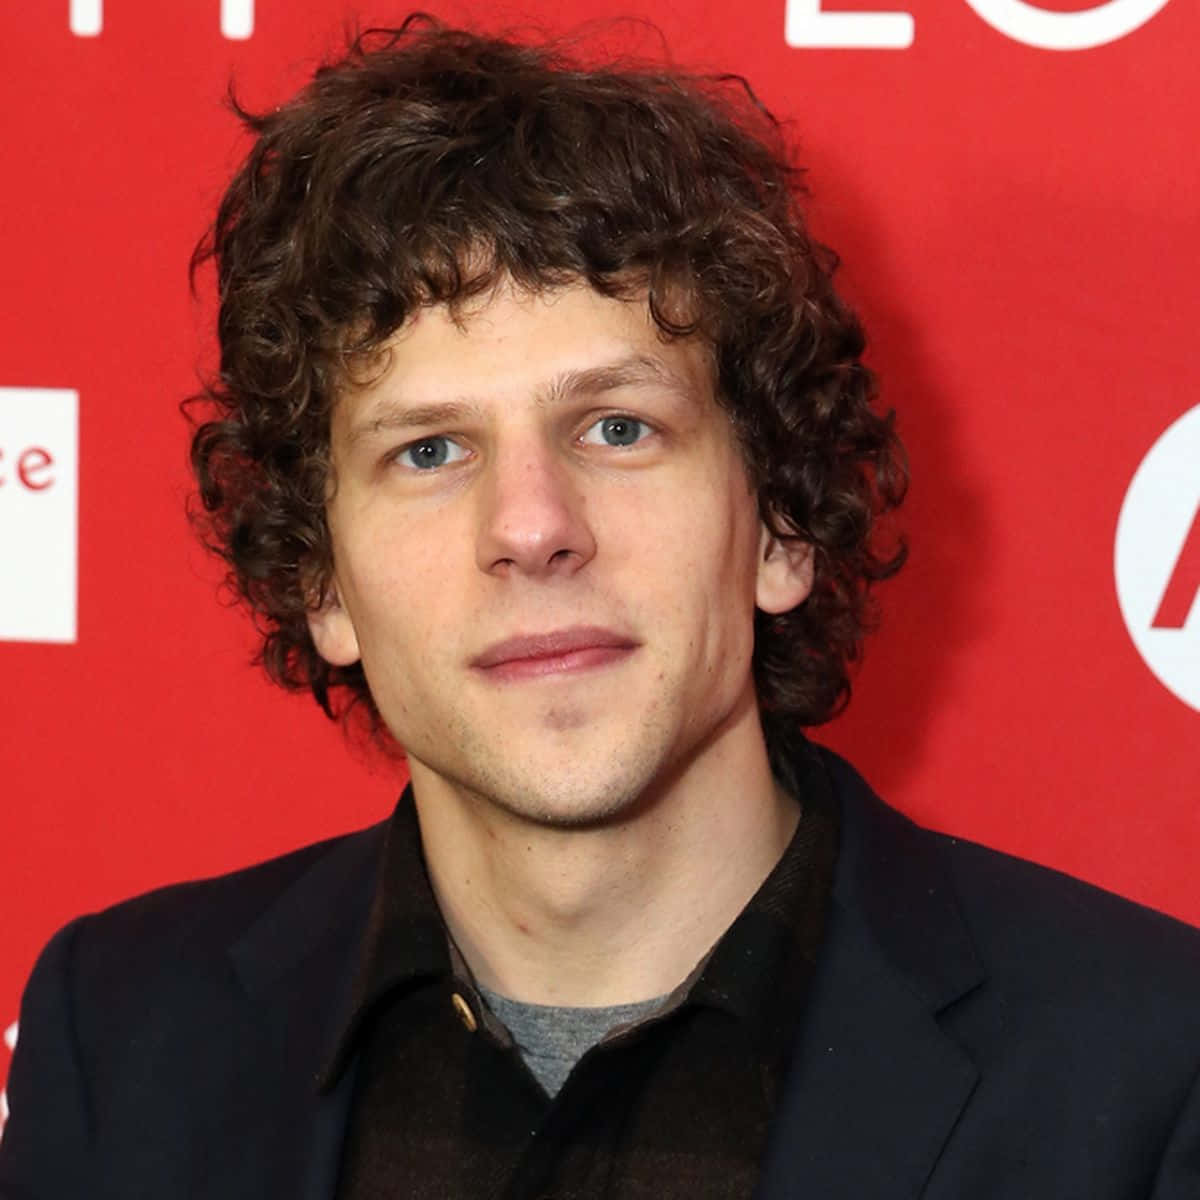 Jesseeisenberg Is An American Actor And Writer. He Is Best Known For His Roles In Films Such As 